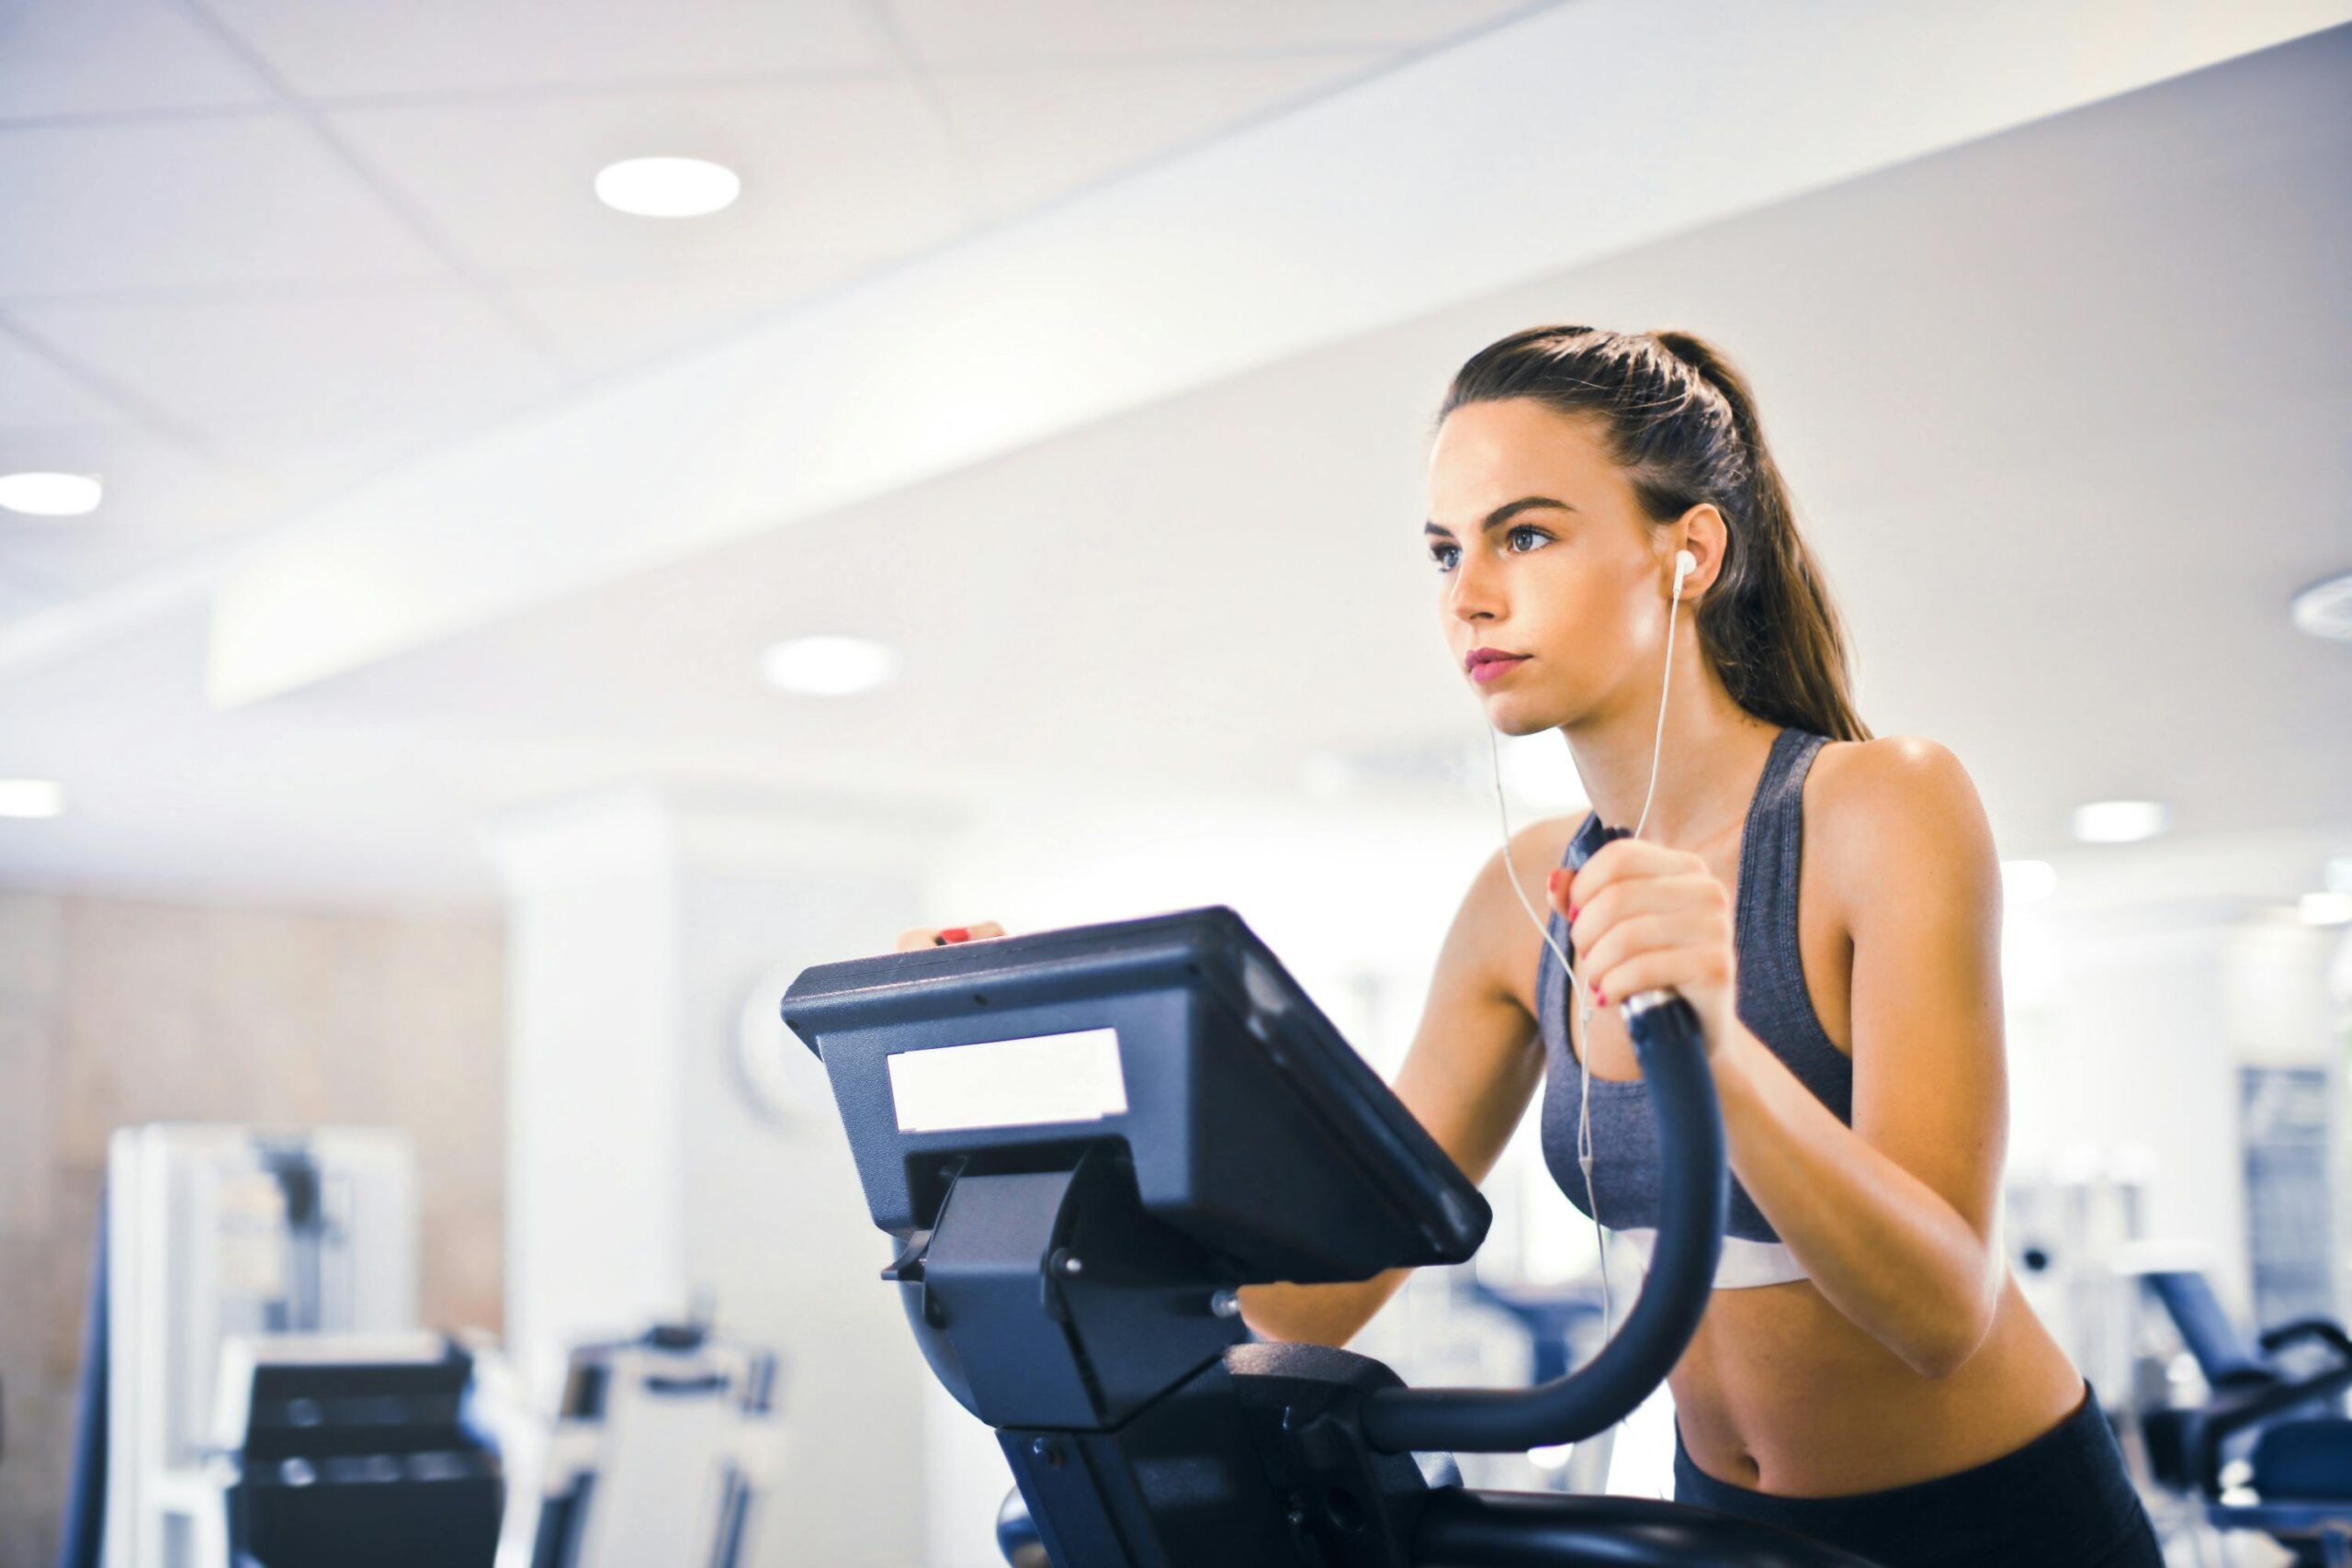 The Beginner Gym Workout Plan for Female Weight Loss